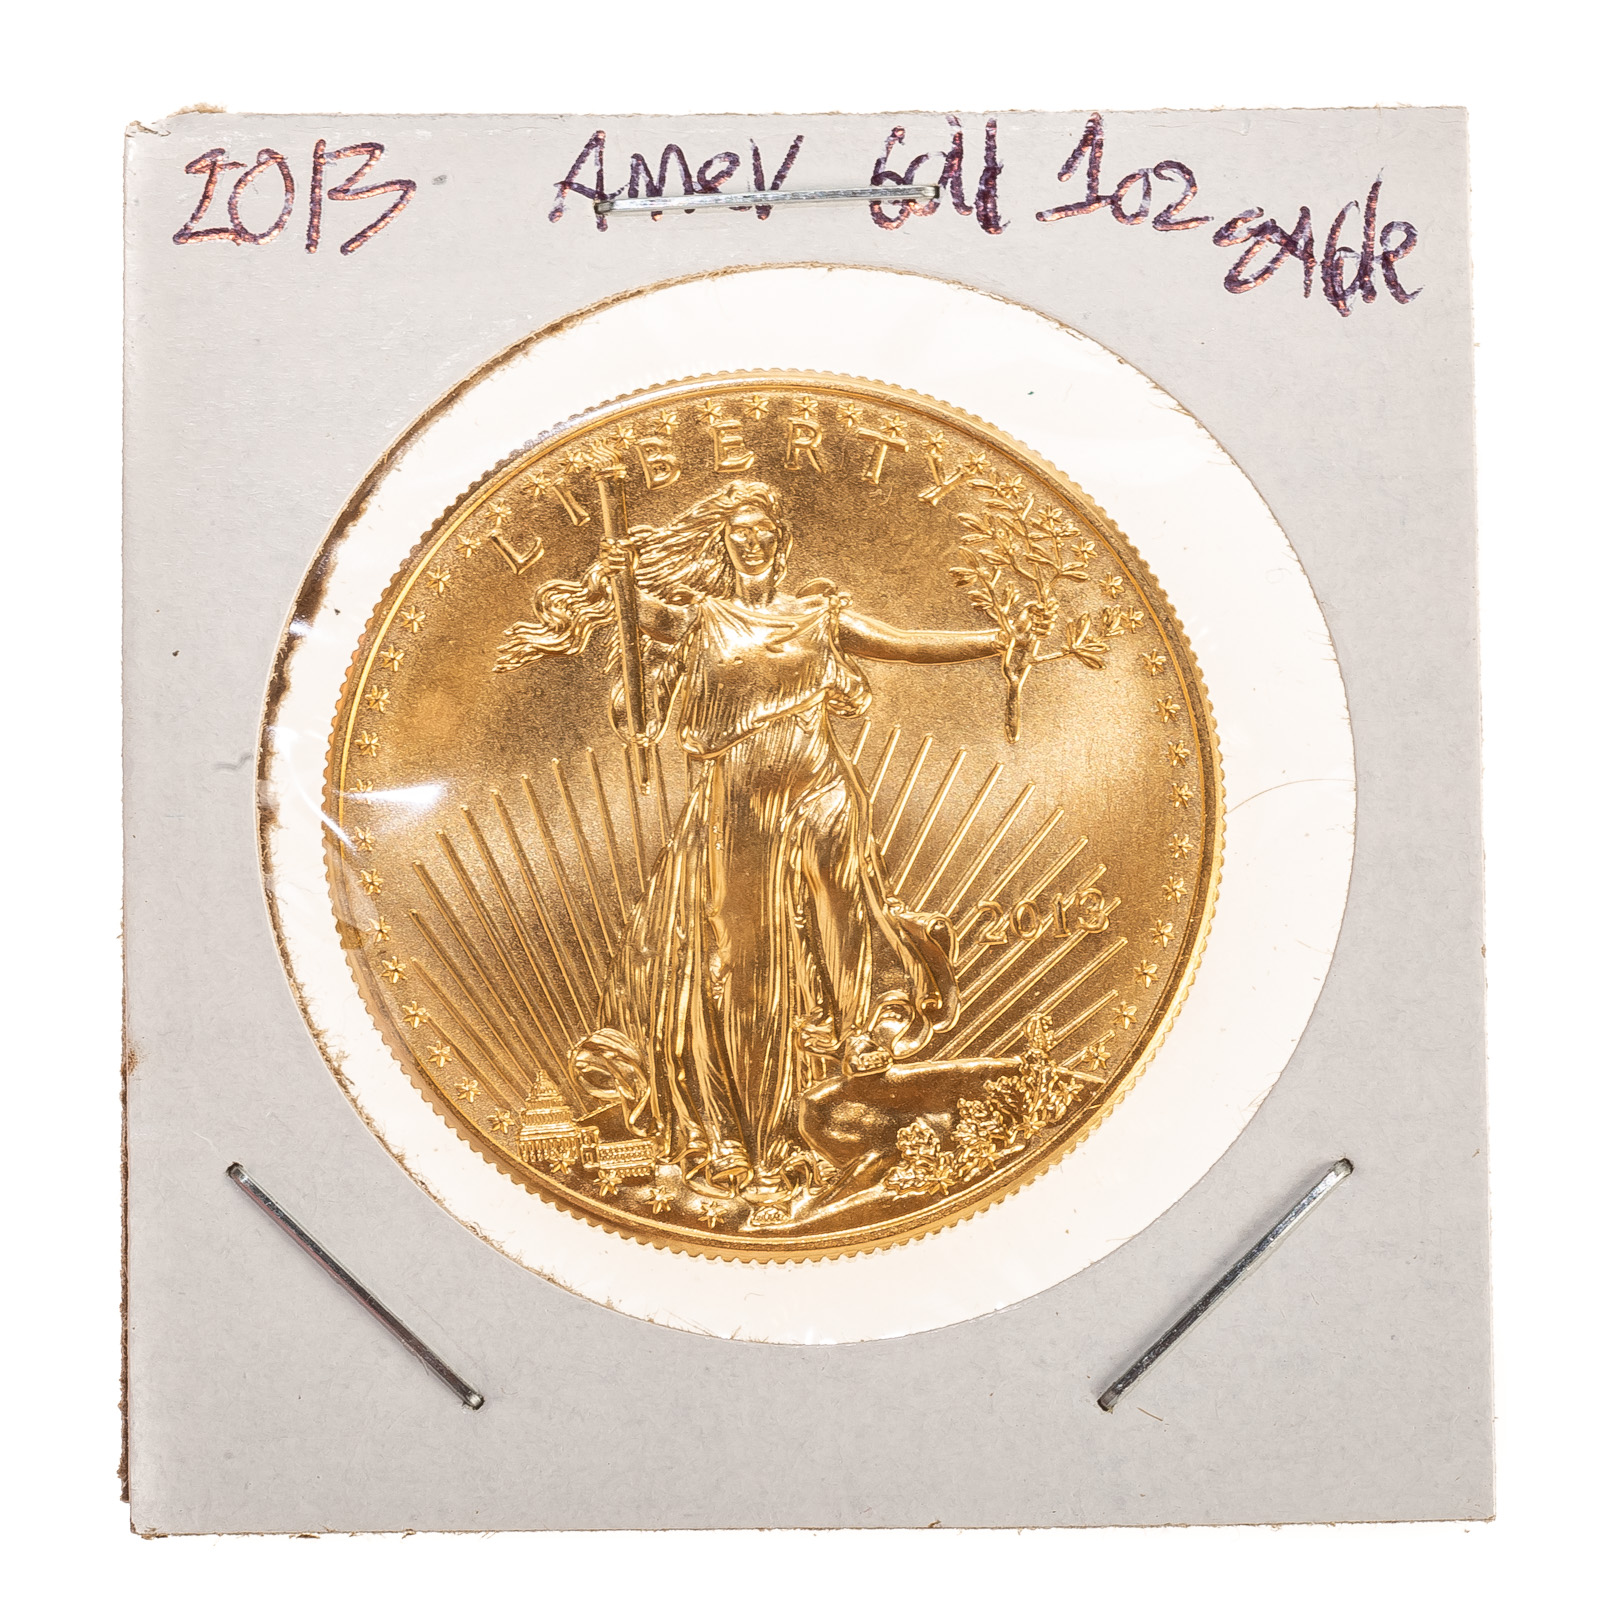 2013 1 OUNCE $50 AMERICAN GOLD